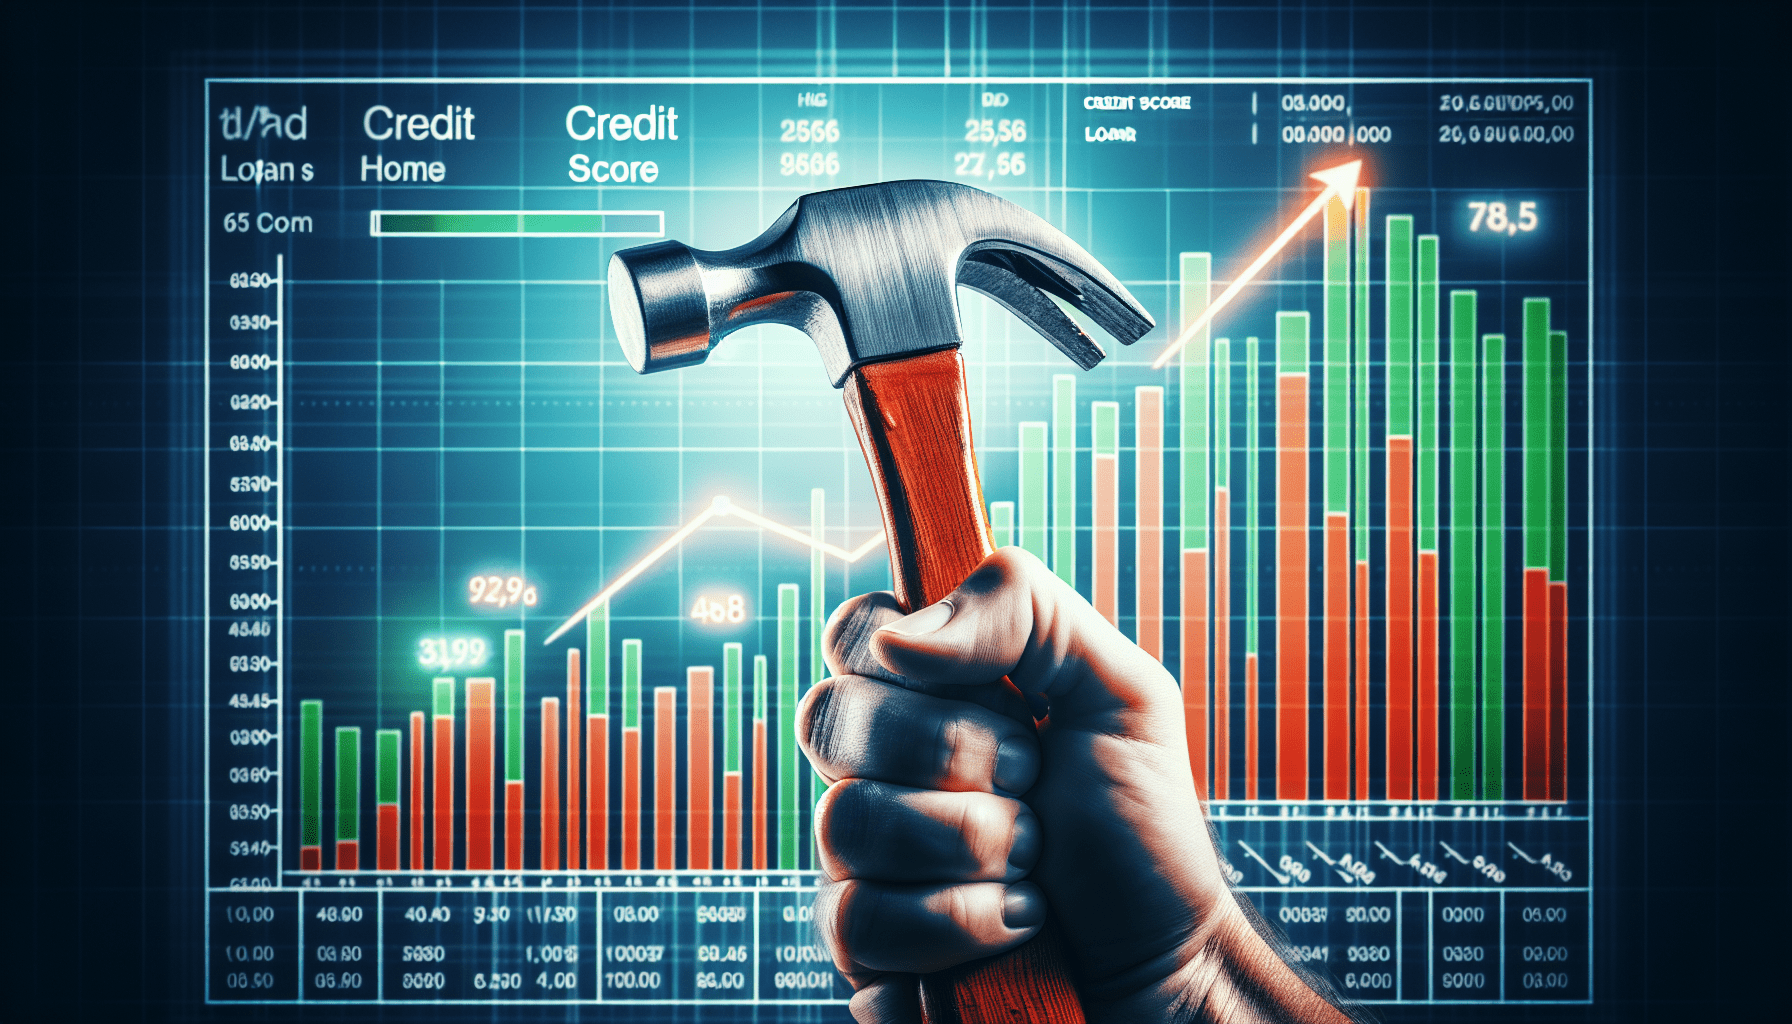 Bad Credit Loan For Home Improvement